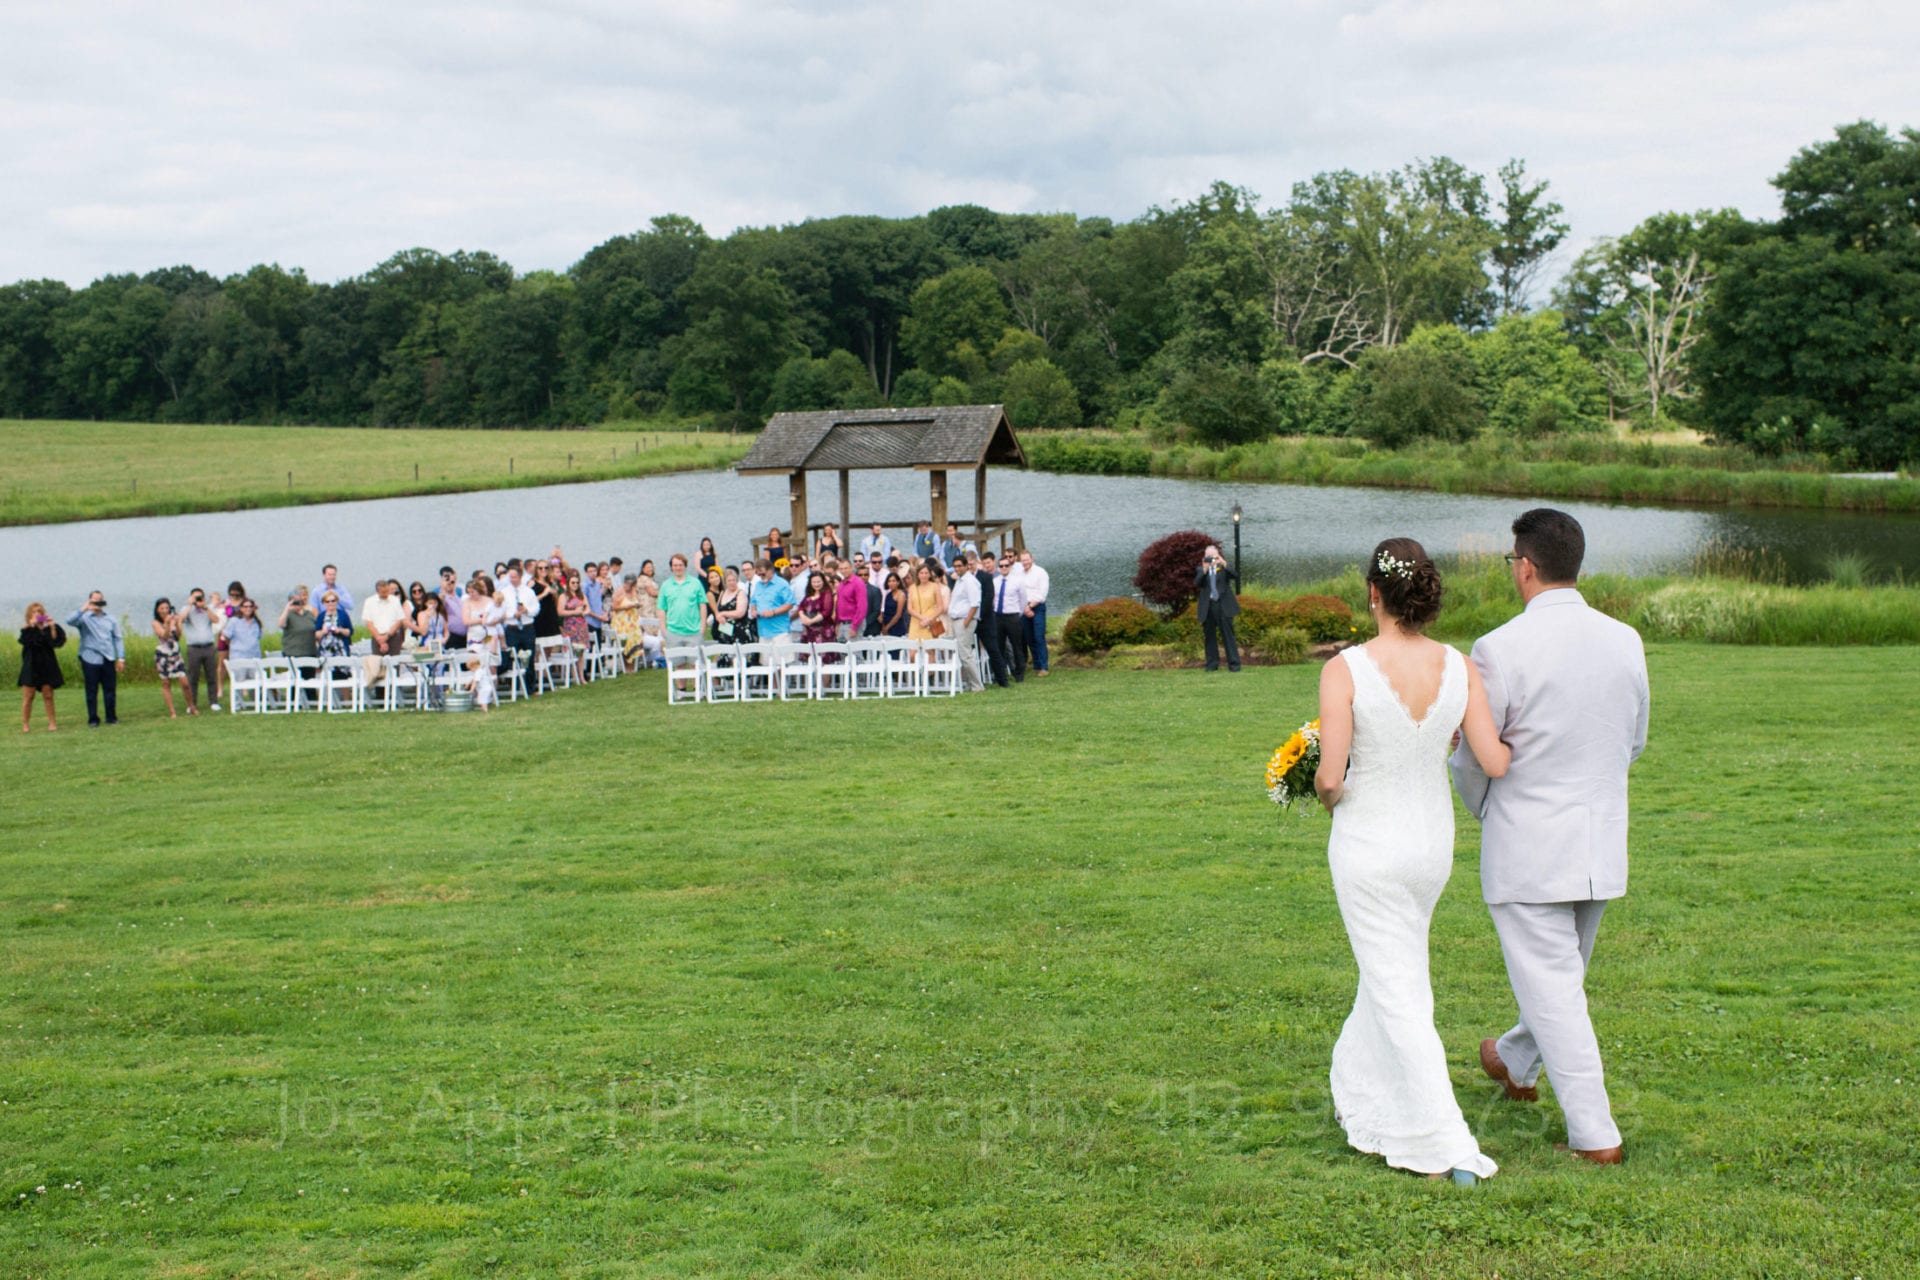 Seen from behind them, a bride and her father walk down a grassy hill towards a pond with a small shelter in front of it. The guests are standing awaiting her arrival to her Armstrong Farms Wedding.